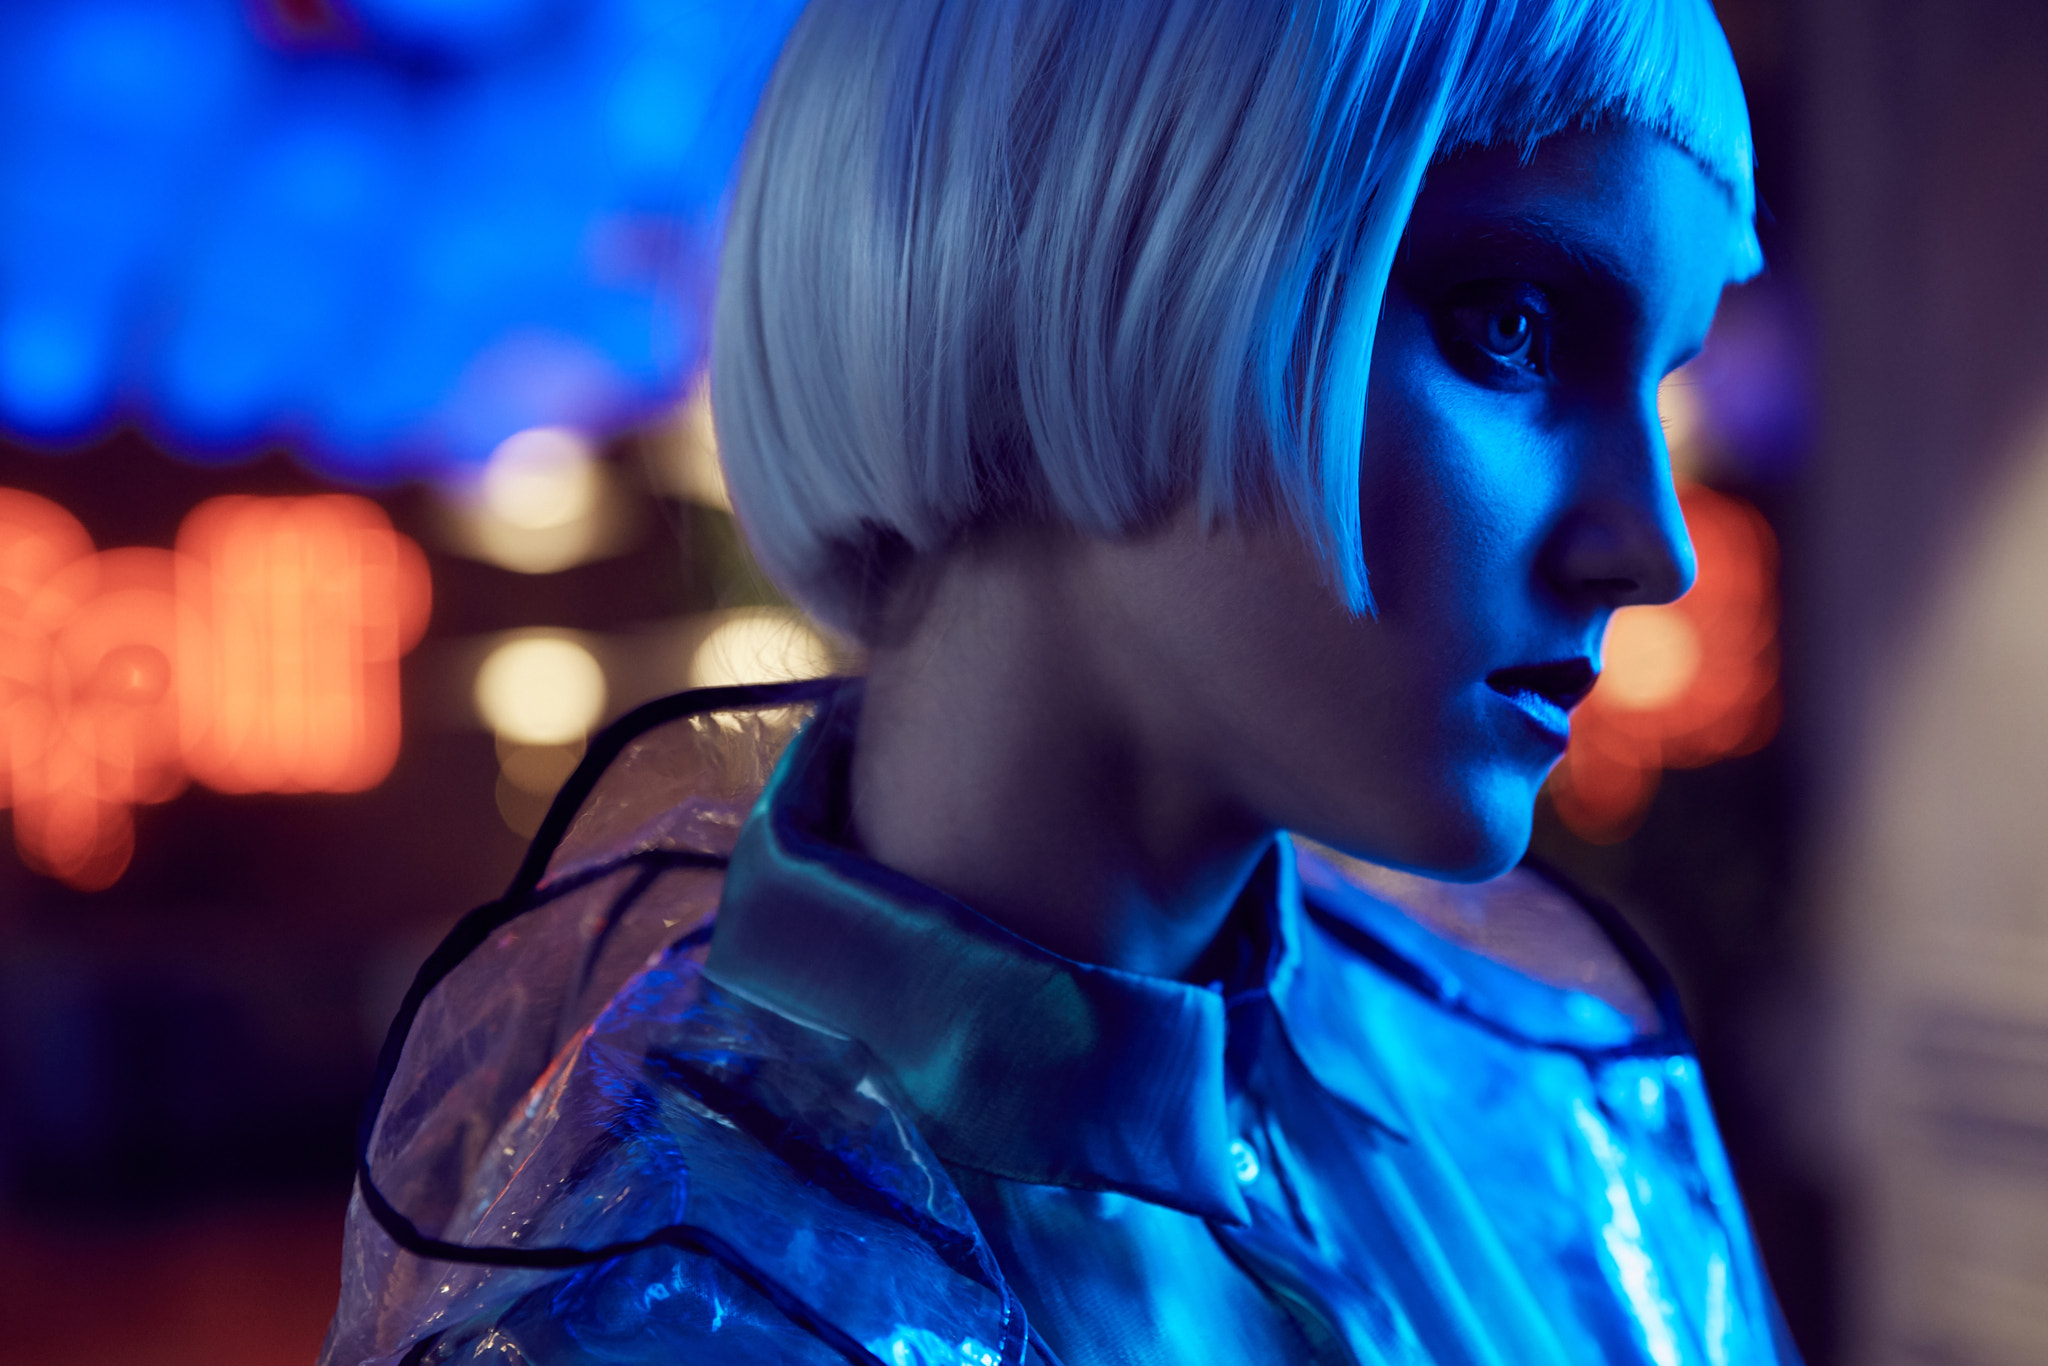 Futuristic neon lighted close up portrait of a girl with white bob hairstyle wearing silky blouse...